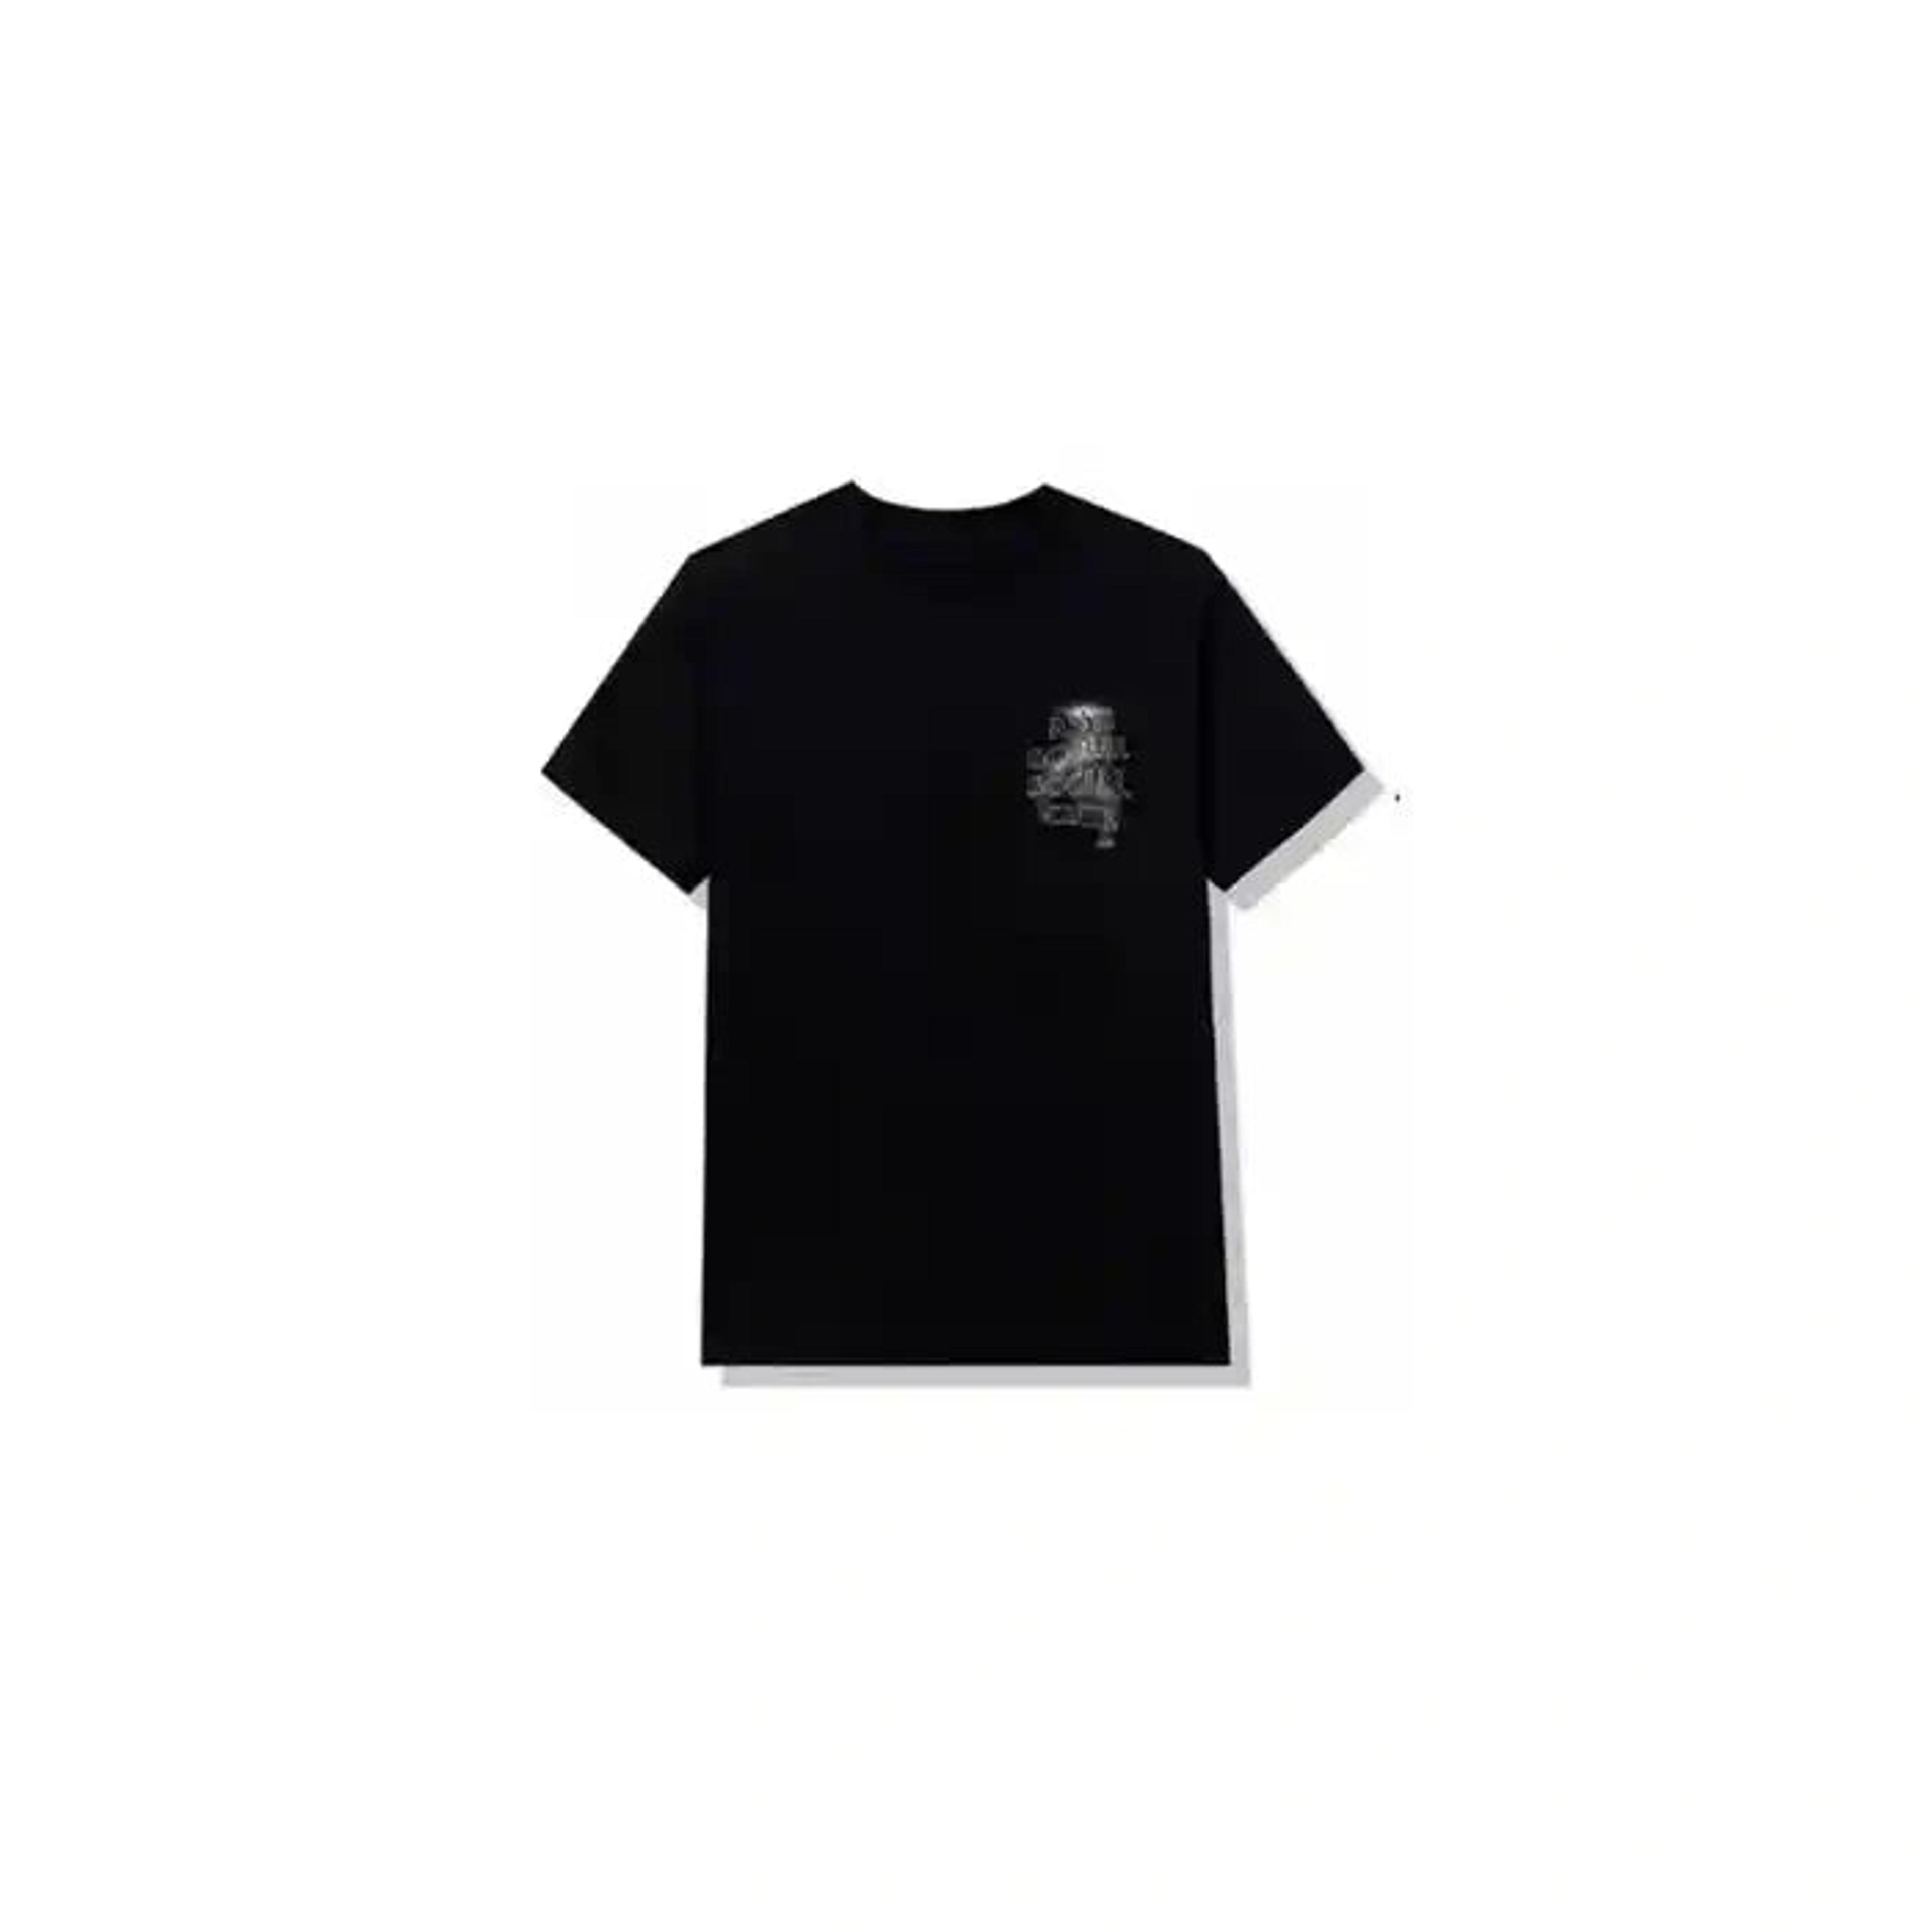 Alternate View 1 of Anti Social Social Club Twisted Black Tee ASSC DS Brand New